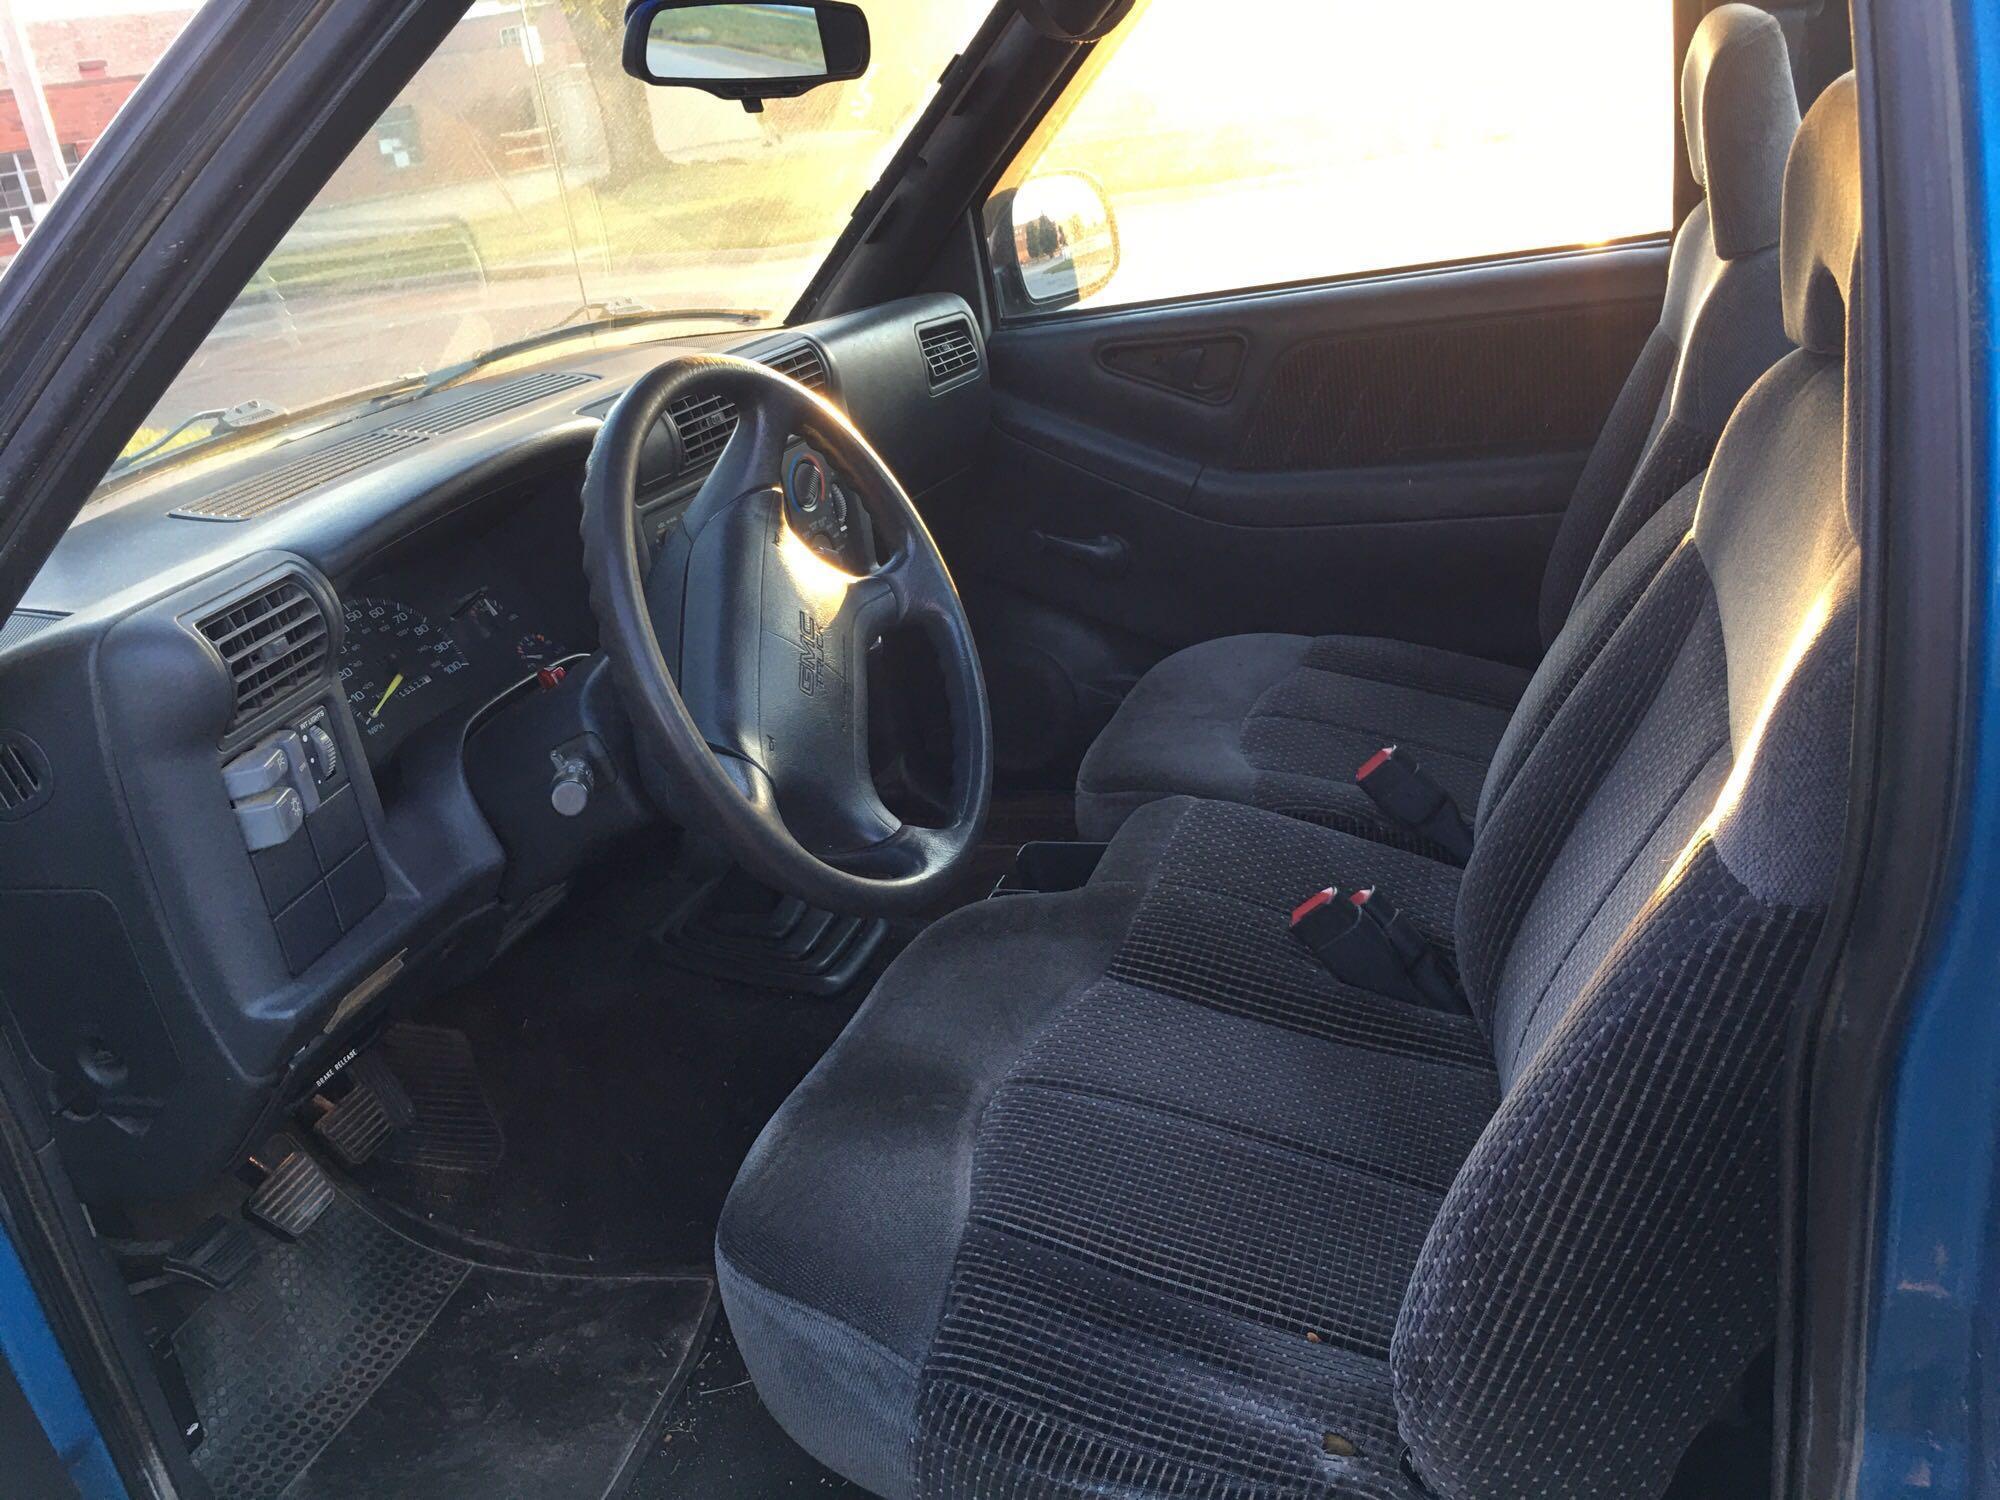 1994 GMC SONOMA 215k mikes stick shift, runs great, mechanical maintained